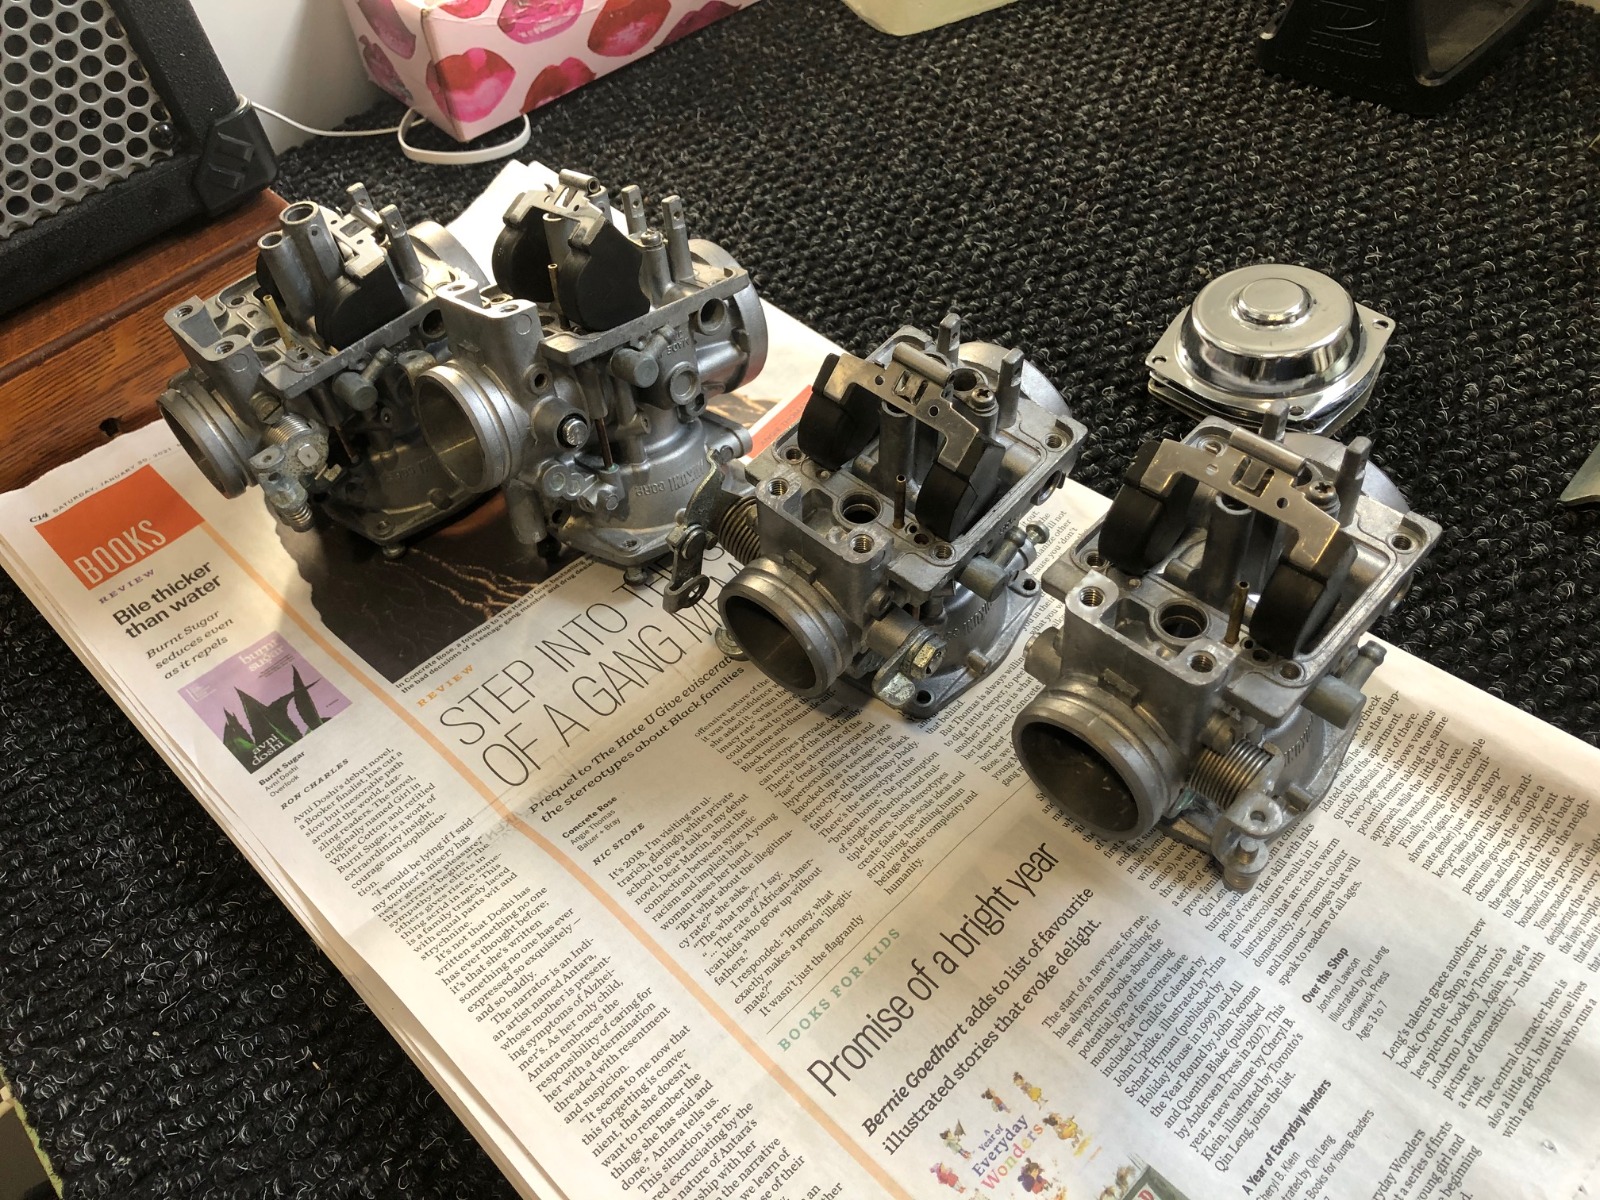 Trying to better understand and ID various carbs? - KZRider Forum 